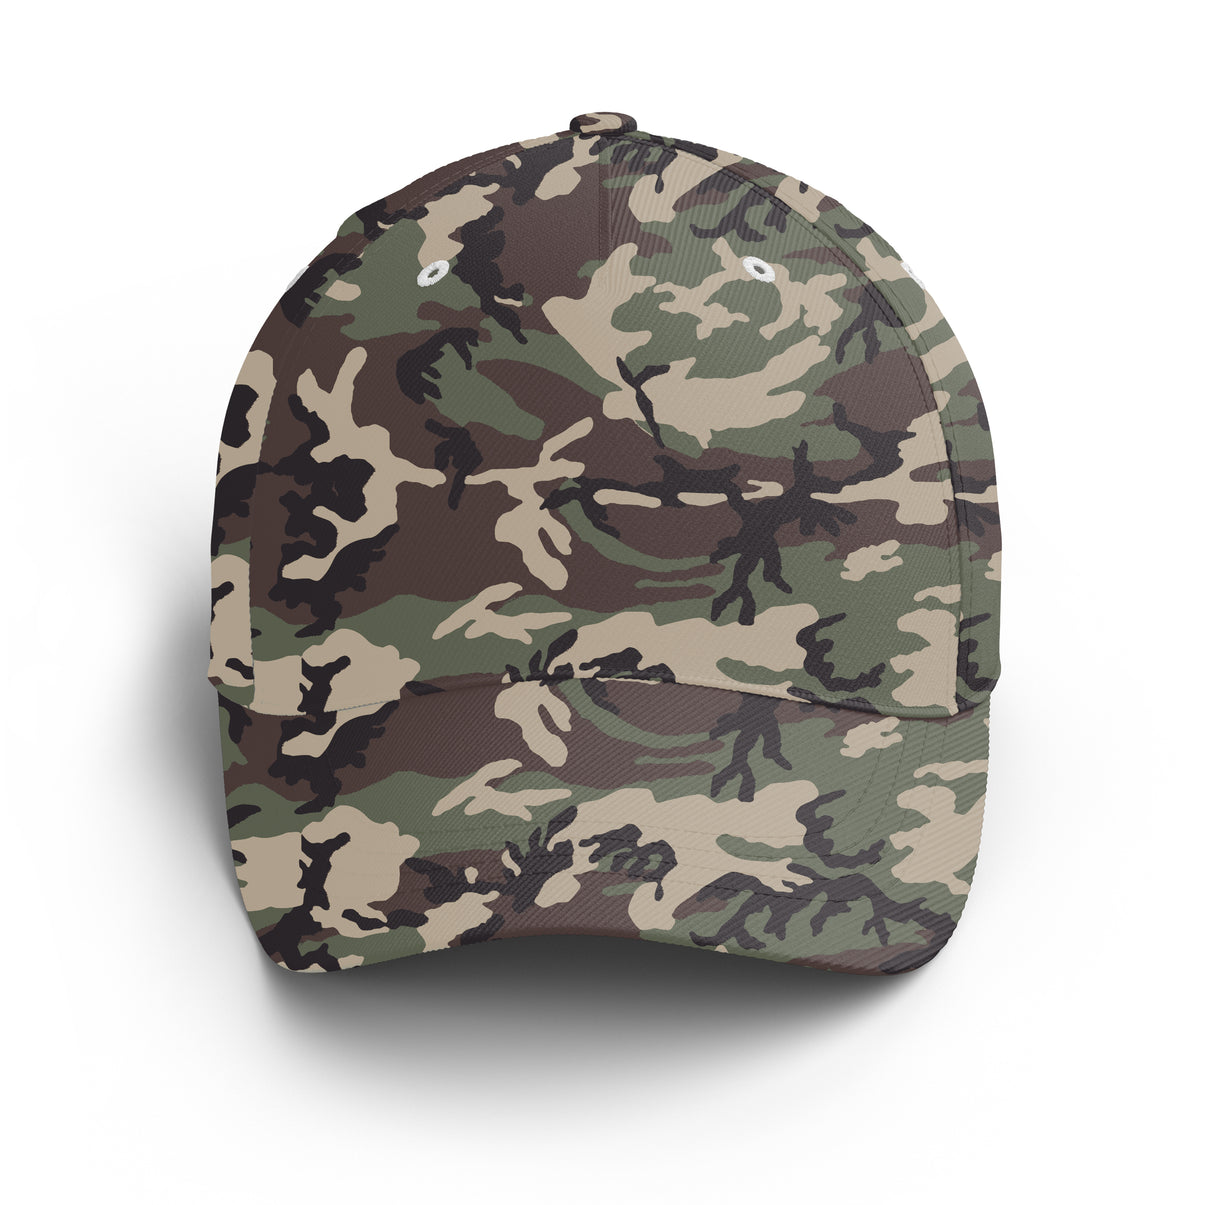 Camouflage Fishing and Hunting Cap, Original Gift for Fisherman and Hunter - CT23072211